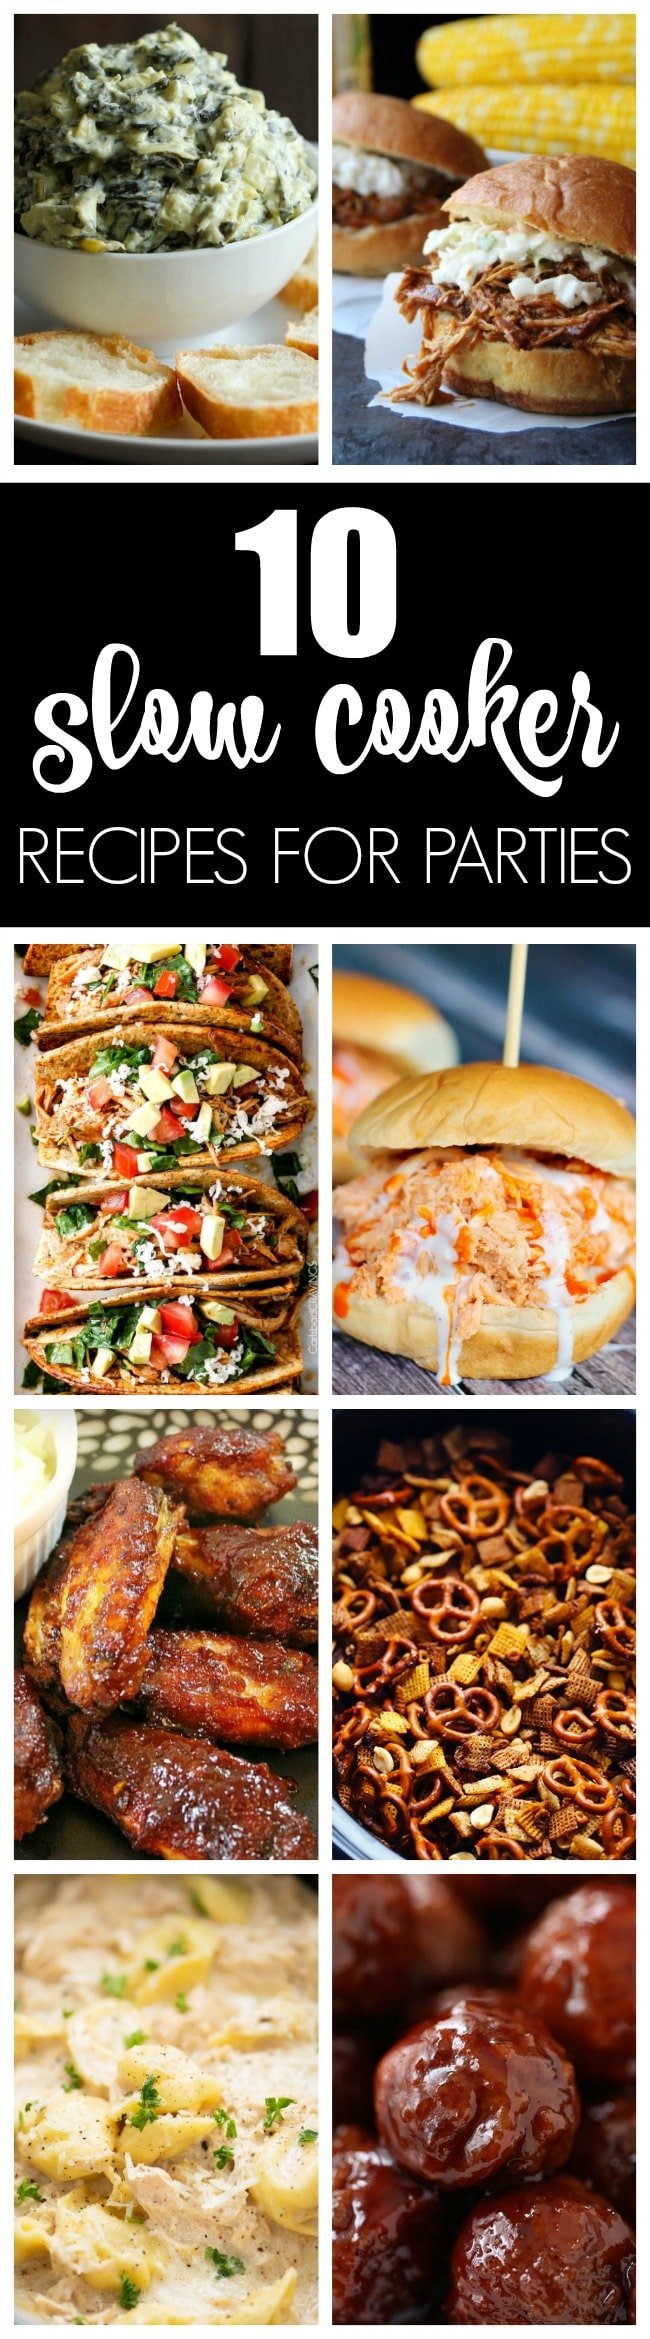 10 Best Crockpot Recipes For Parties - Pretty My Party